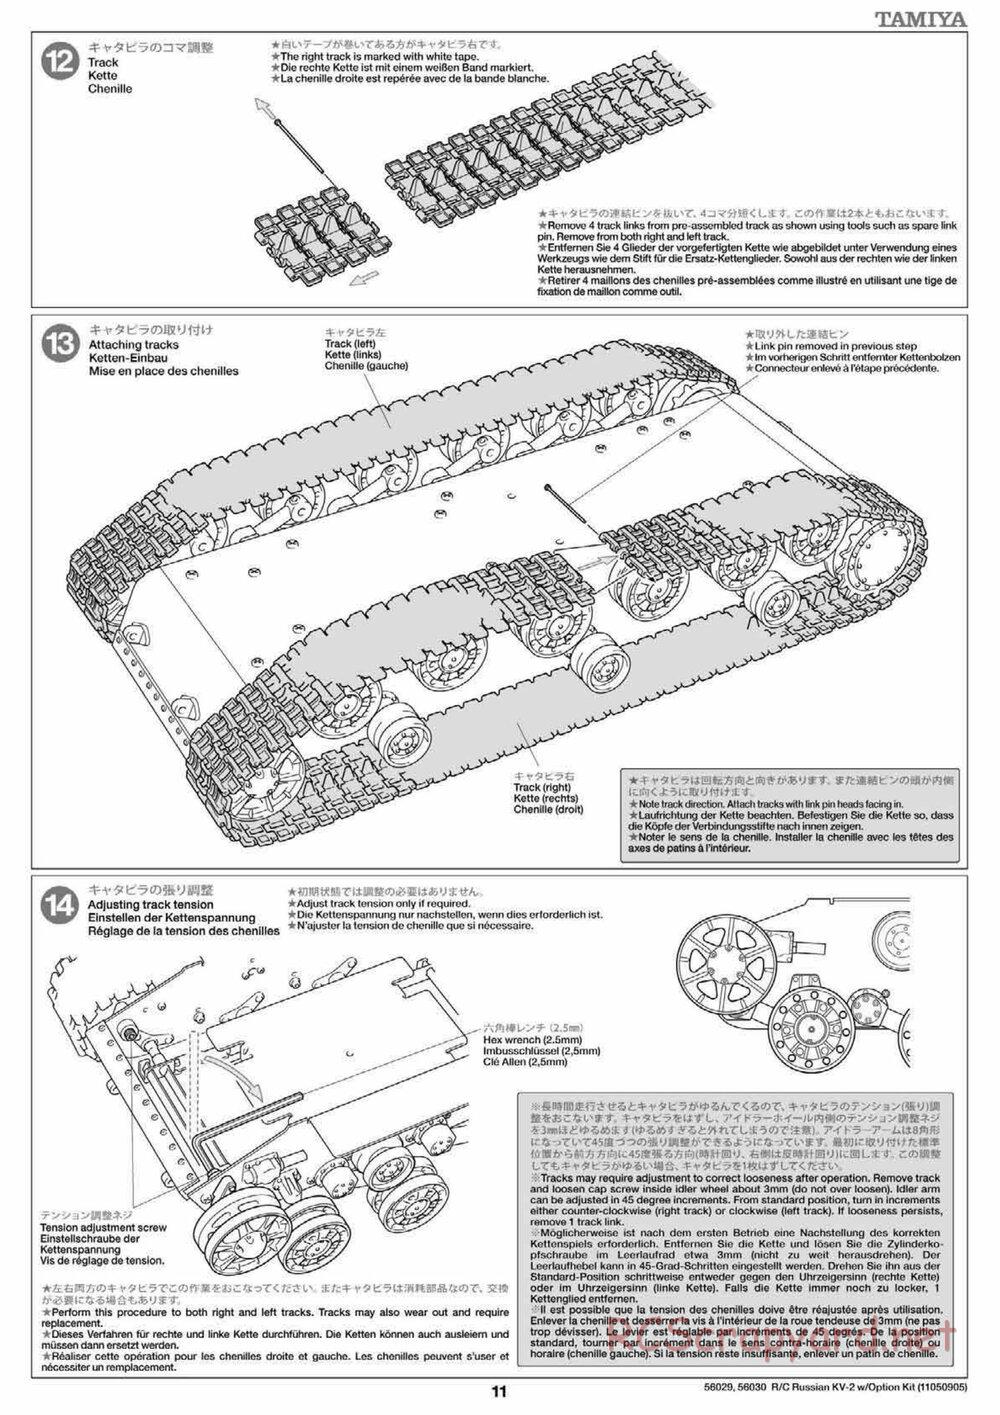 Tamiya - Russian Heavy Tank KV-2 Gigant - 1/16 Scale Chassis - Manual - Page 11